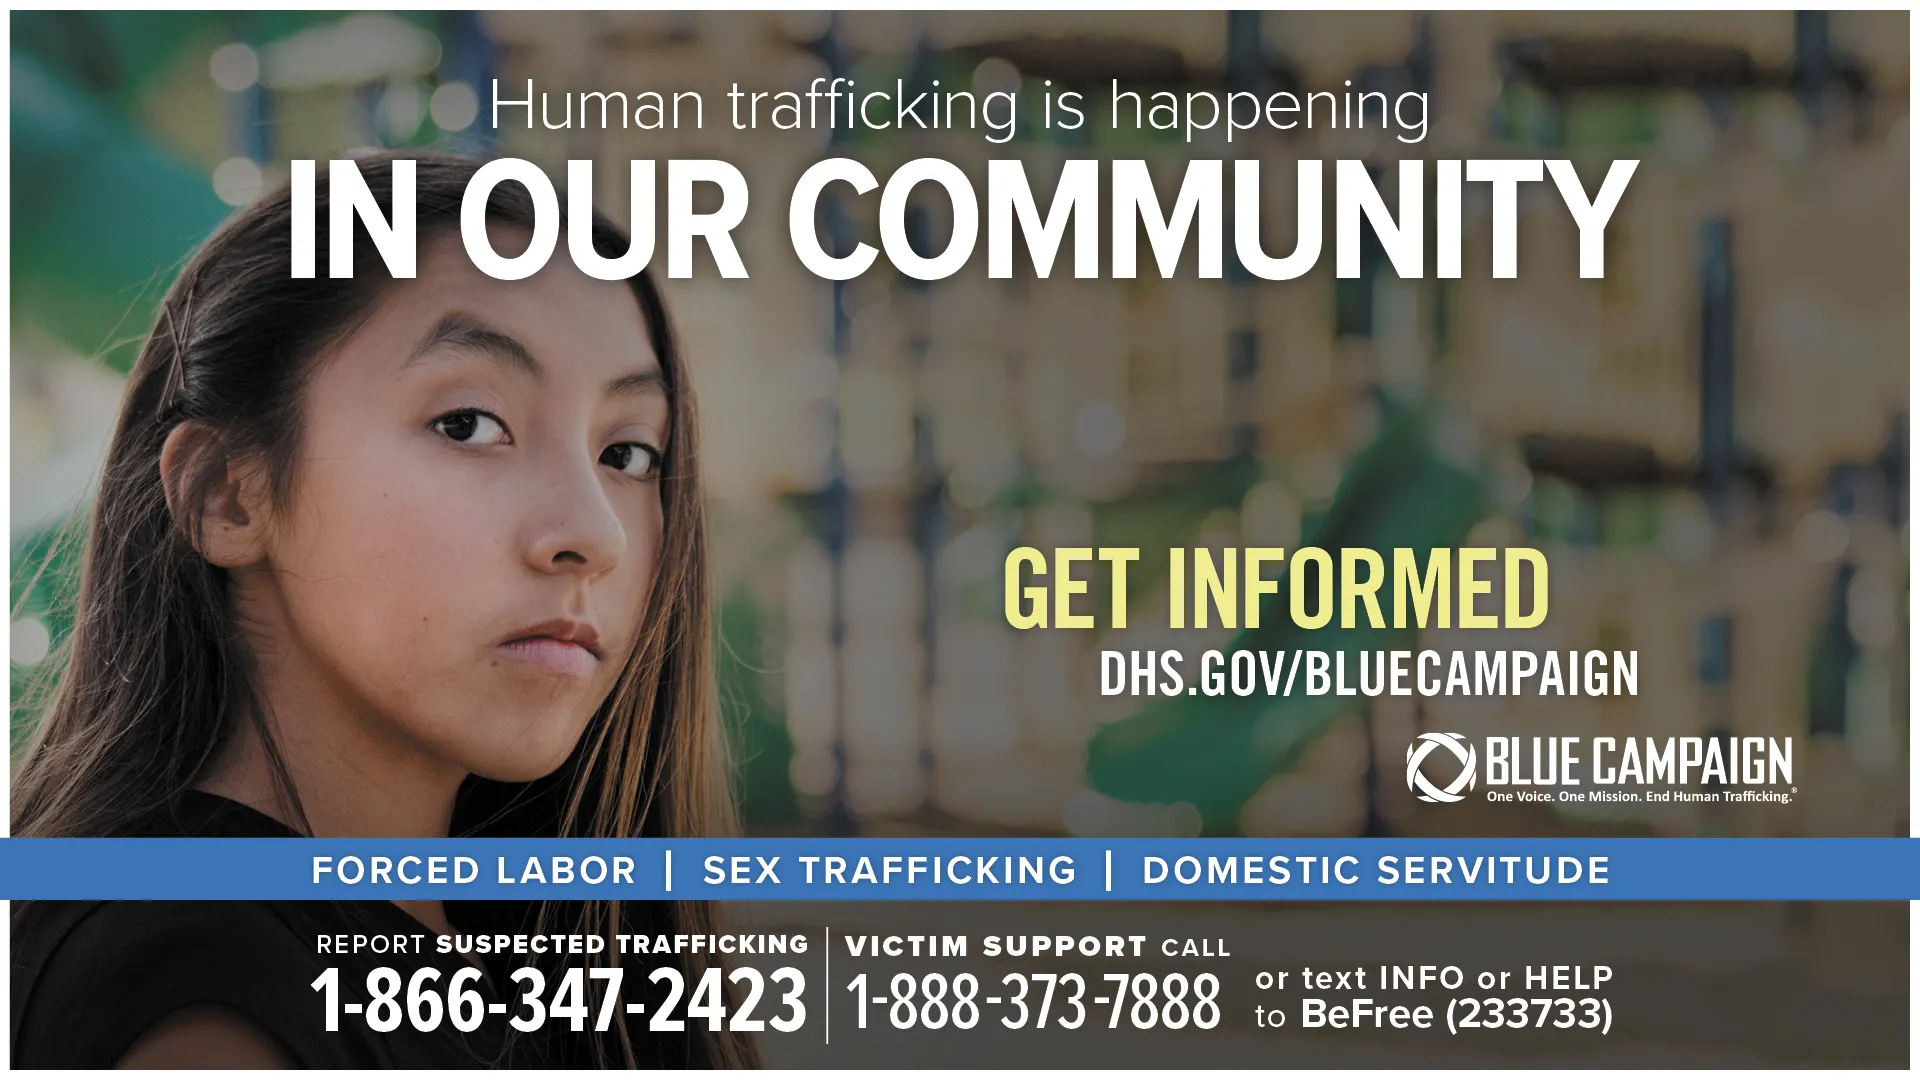 This poster shows a Native American girl in front of a playground looking directly into the camera with a neutral expression with the text “Human trafficking is happening in our community. Get informed. DHS.gov/BlueCampaign. Forced Labor, Sex Trafficking, Domestic Servitude. Report suspected trafficking: 1-866-347-2423. Victim support call: 1-888-373-7888 or text INFO or HELP to BeFree (233733).” 